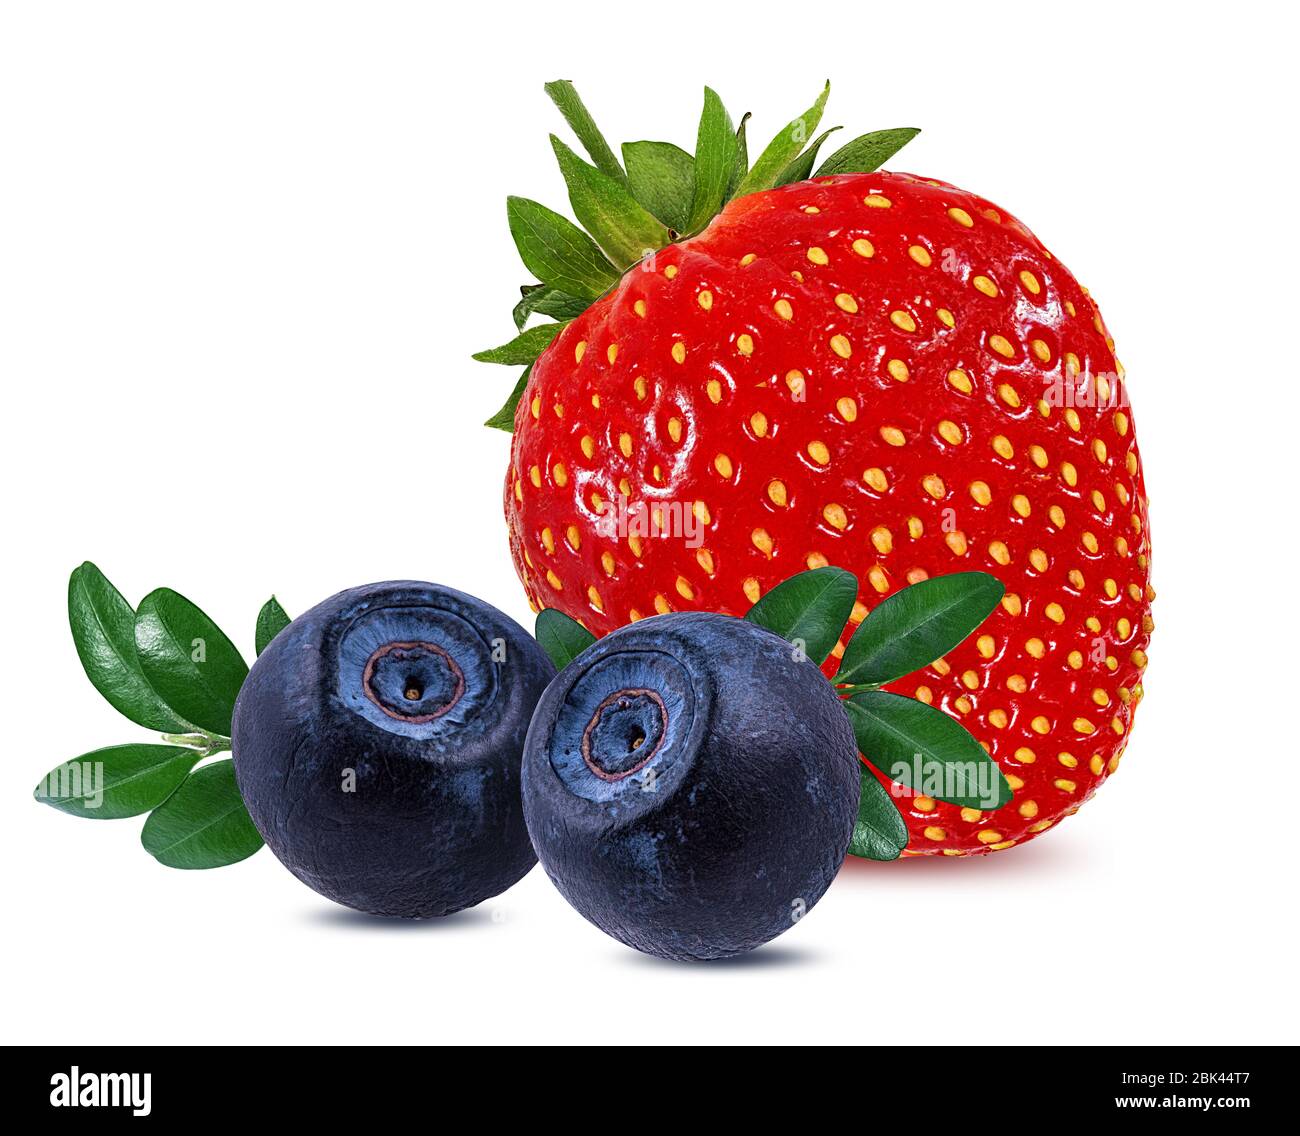 Strawberry and blueberry isolated on white. Stock Photo